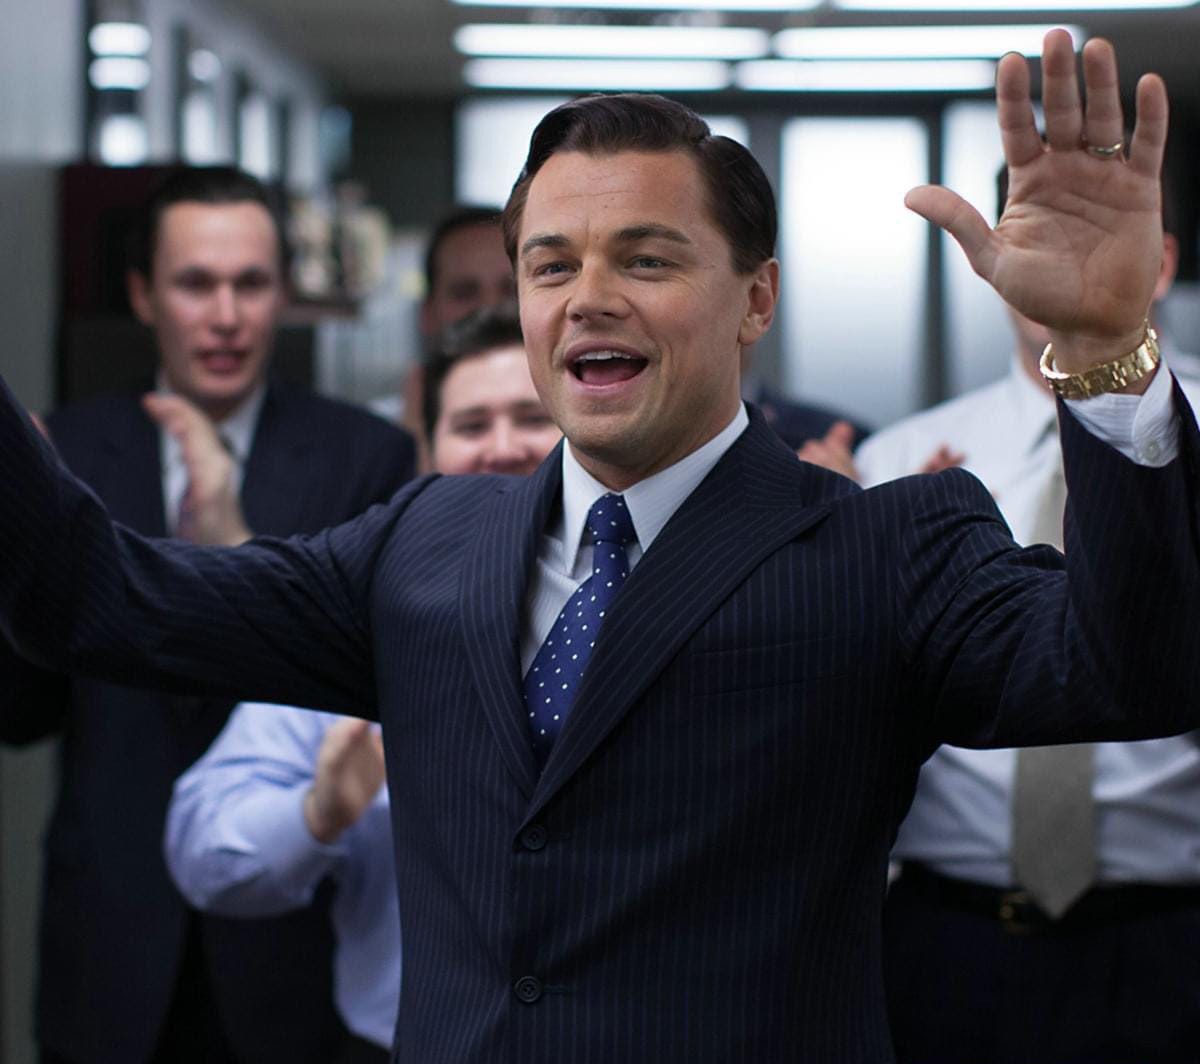 ‘Don’t Look Up’, ‘Roosevelt’ and more: Leonardo DiCaprio’s upcoming movies